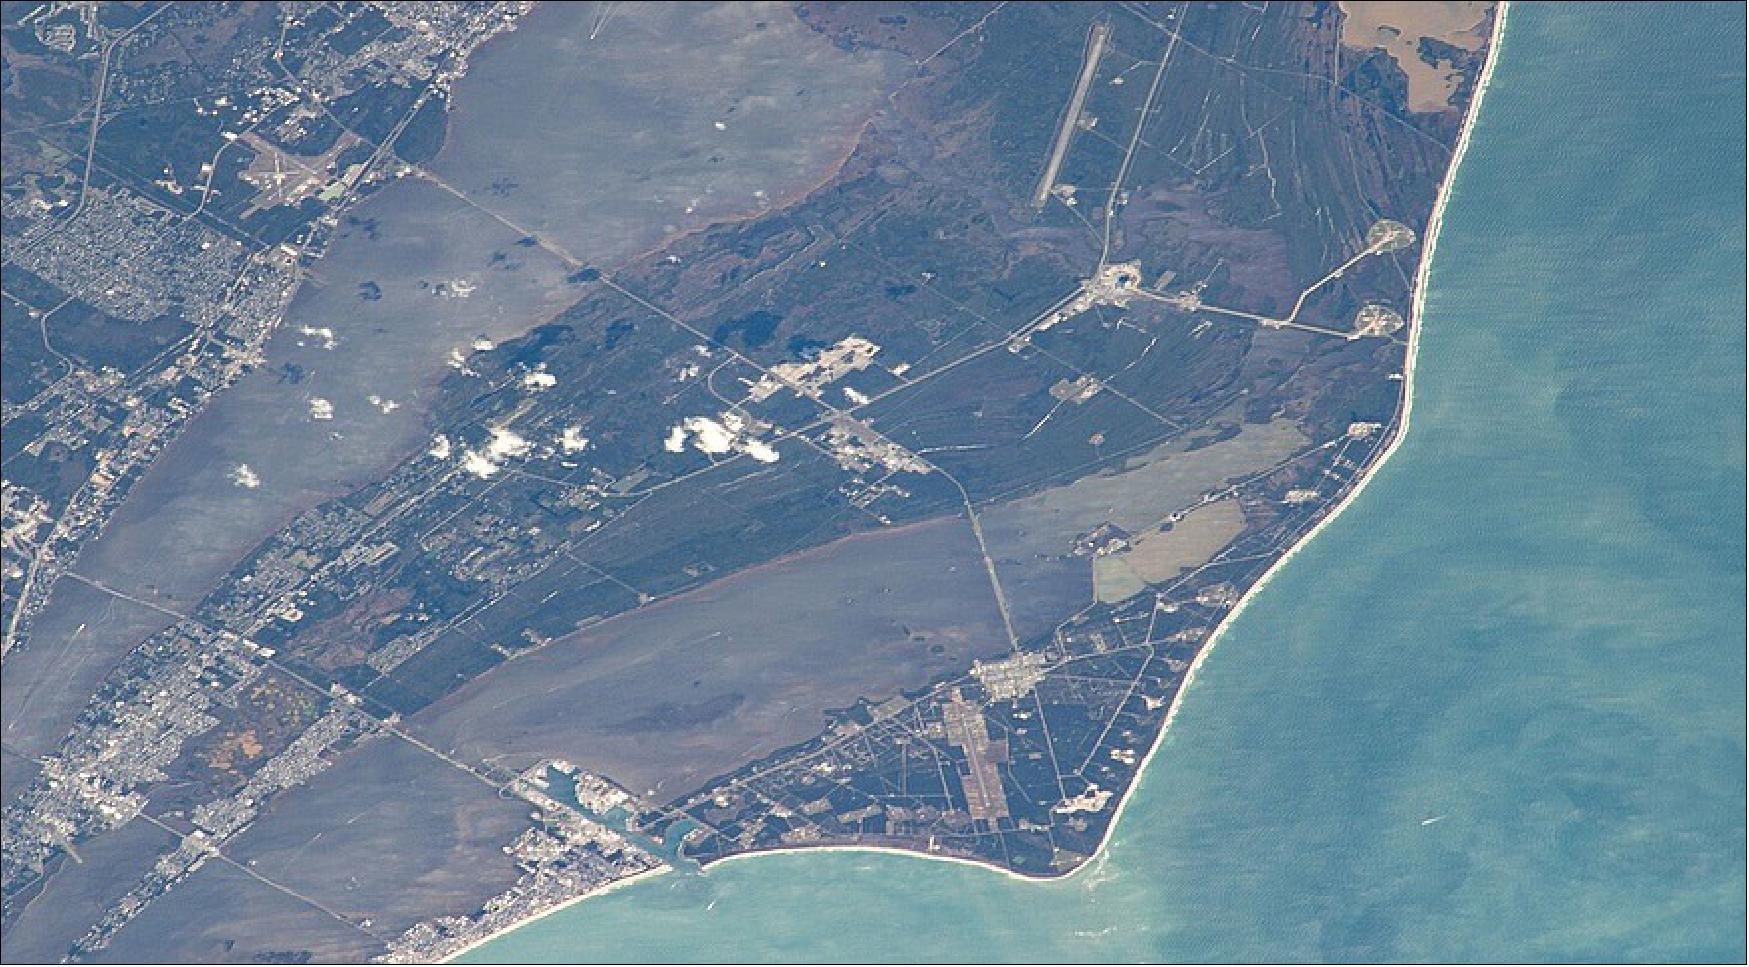 Figure 37: Cape Canaveral and its various launch sites as seen from orbit. Growing demand for launches there could be hindered by a lack of spare parts for some range equipment that is decades old and no longer manufactured, a report warned (image credit: NASA)